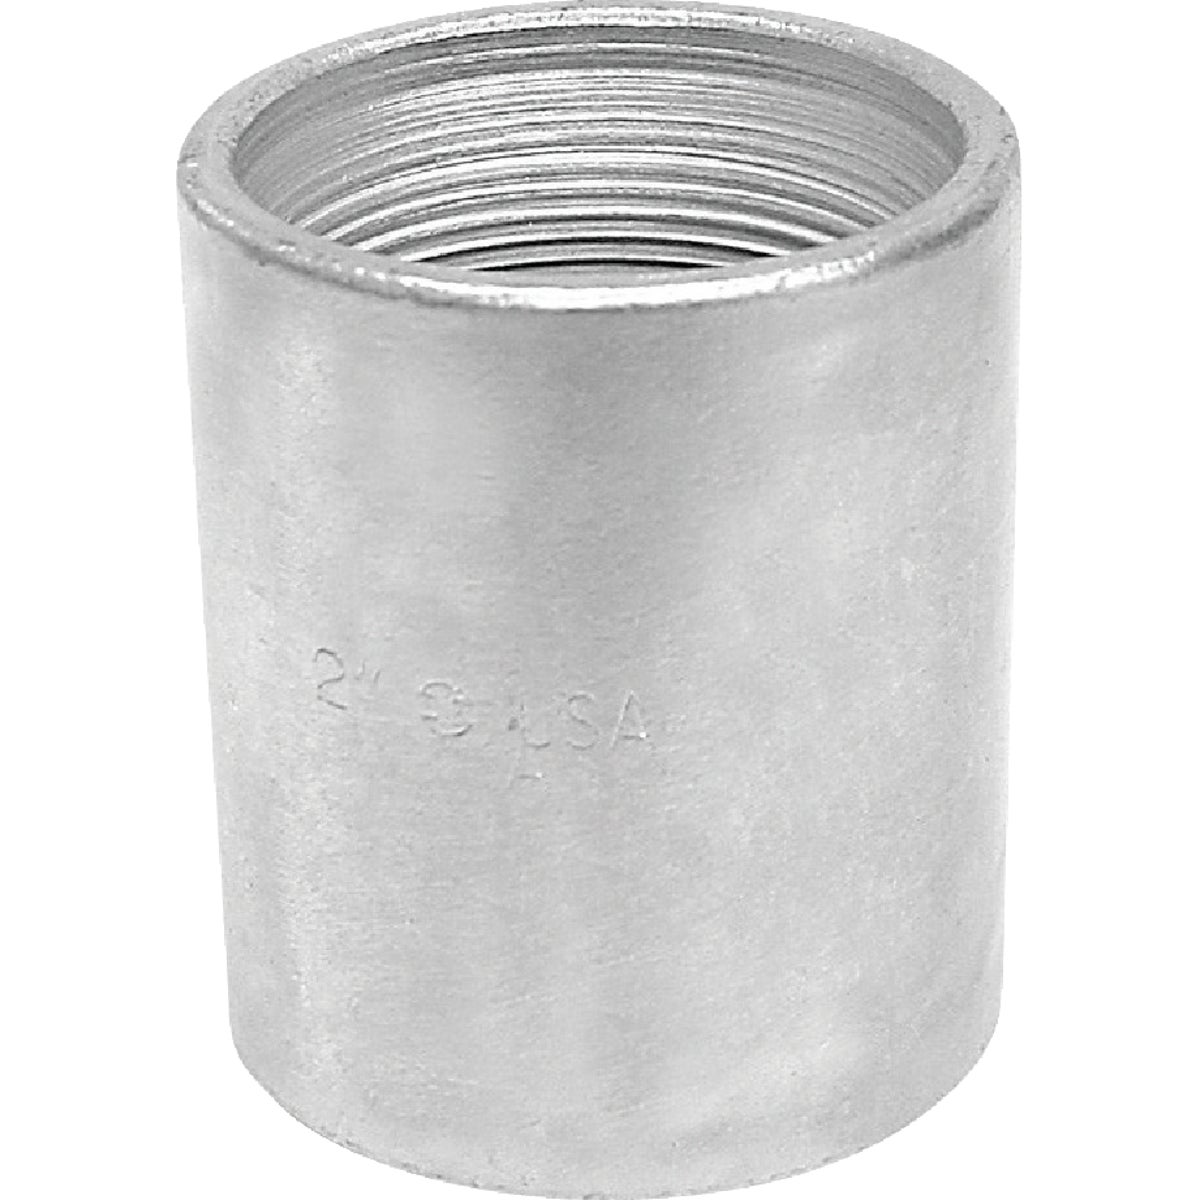 Southland 1/2 In. x 1/2 In. FPT Standard Merchant Galvanized Coupling